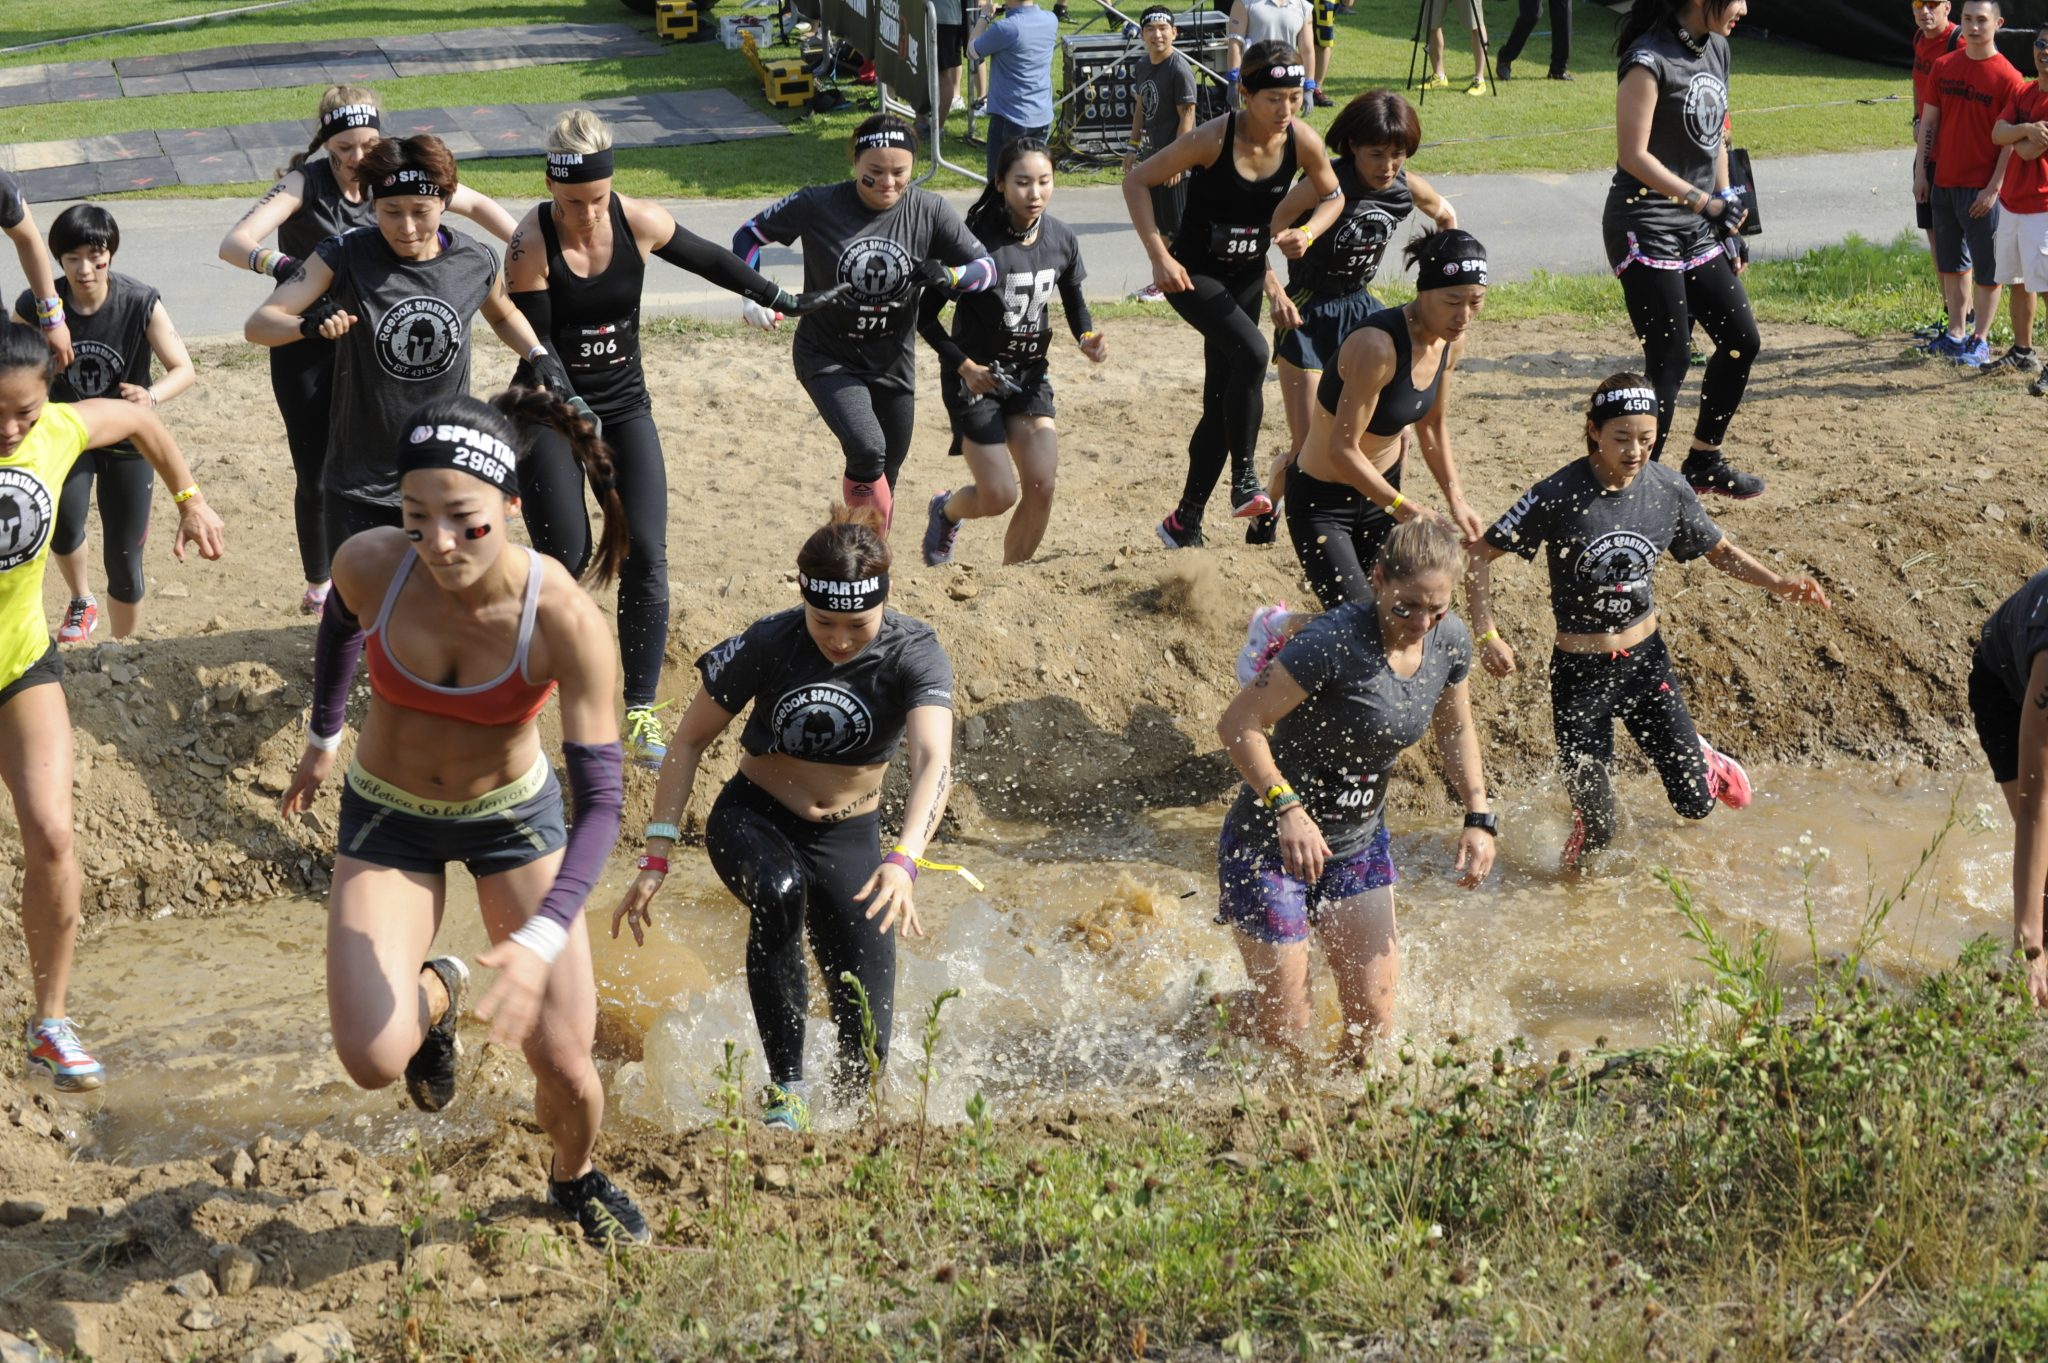 2048x1363 Win FREE Entry into the 2015 Singapore Spartan Race